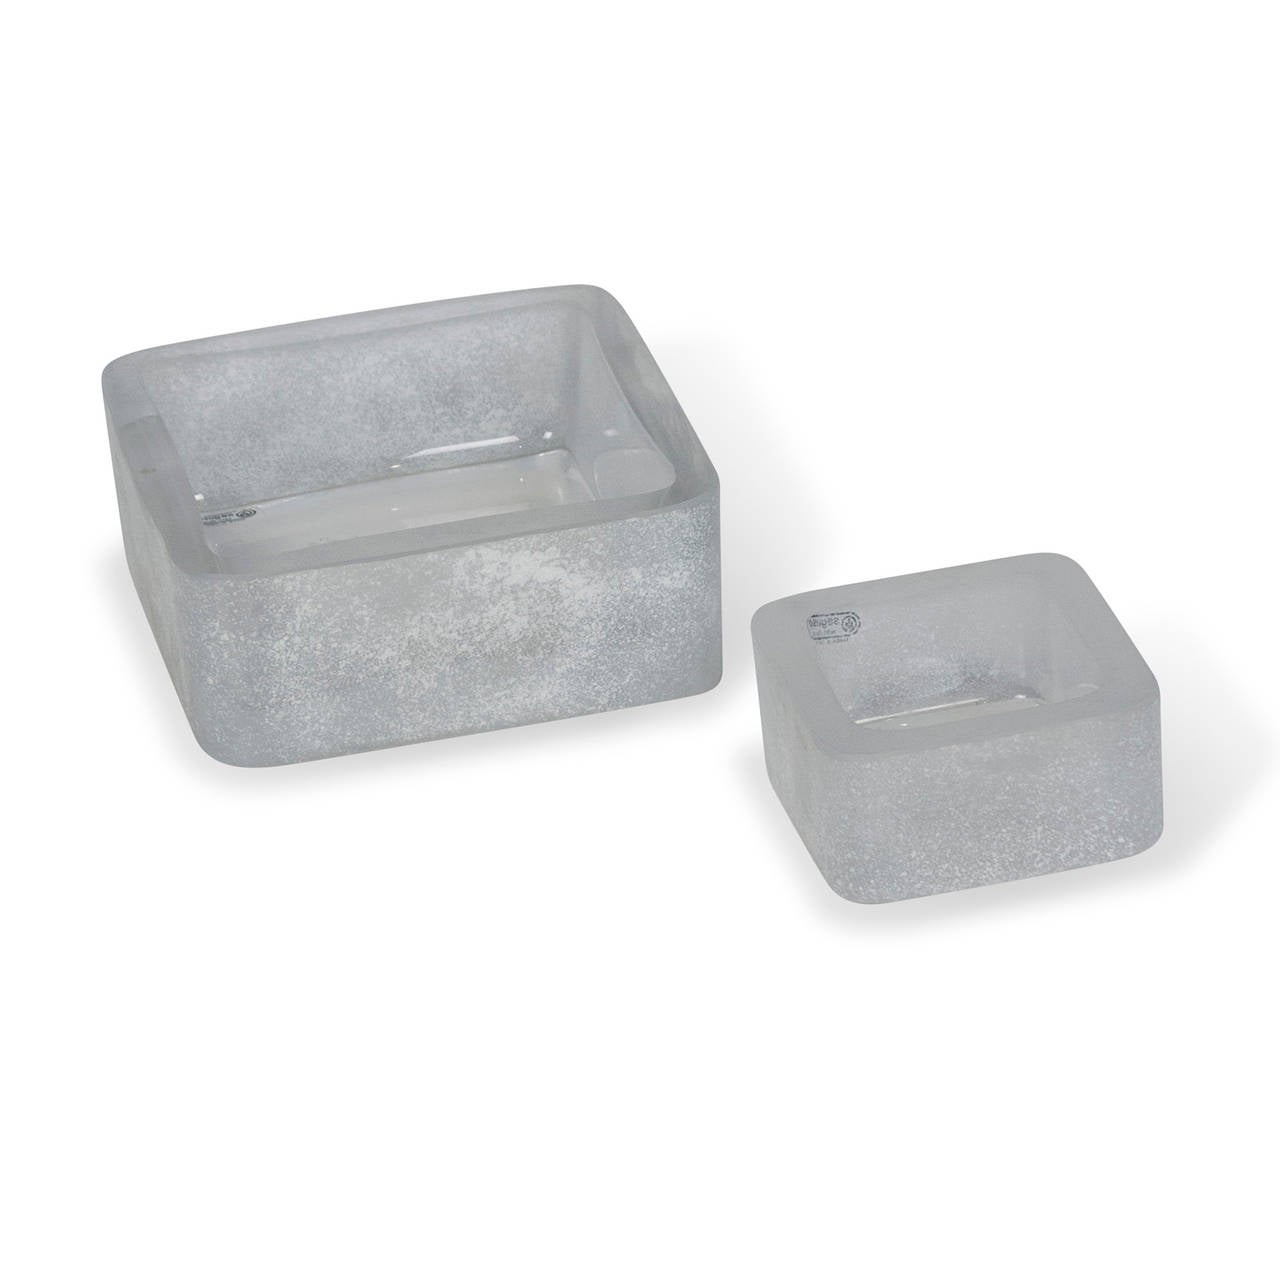 Two frosted glass dishes, square: On left: Square white frosted glass dish, with textured sides and insides, by Seguso, Italian 1970s. 2 3/4 high, 7 in square. (Item #2078). On right: Square white frosted glass dish, with textured sides, insides and